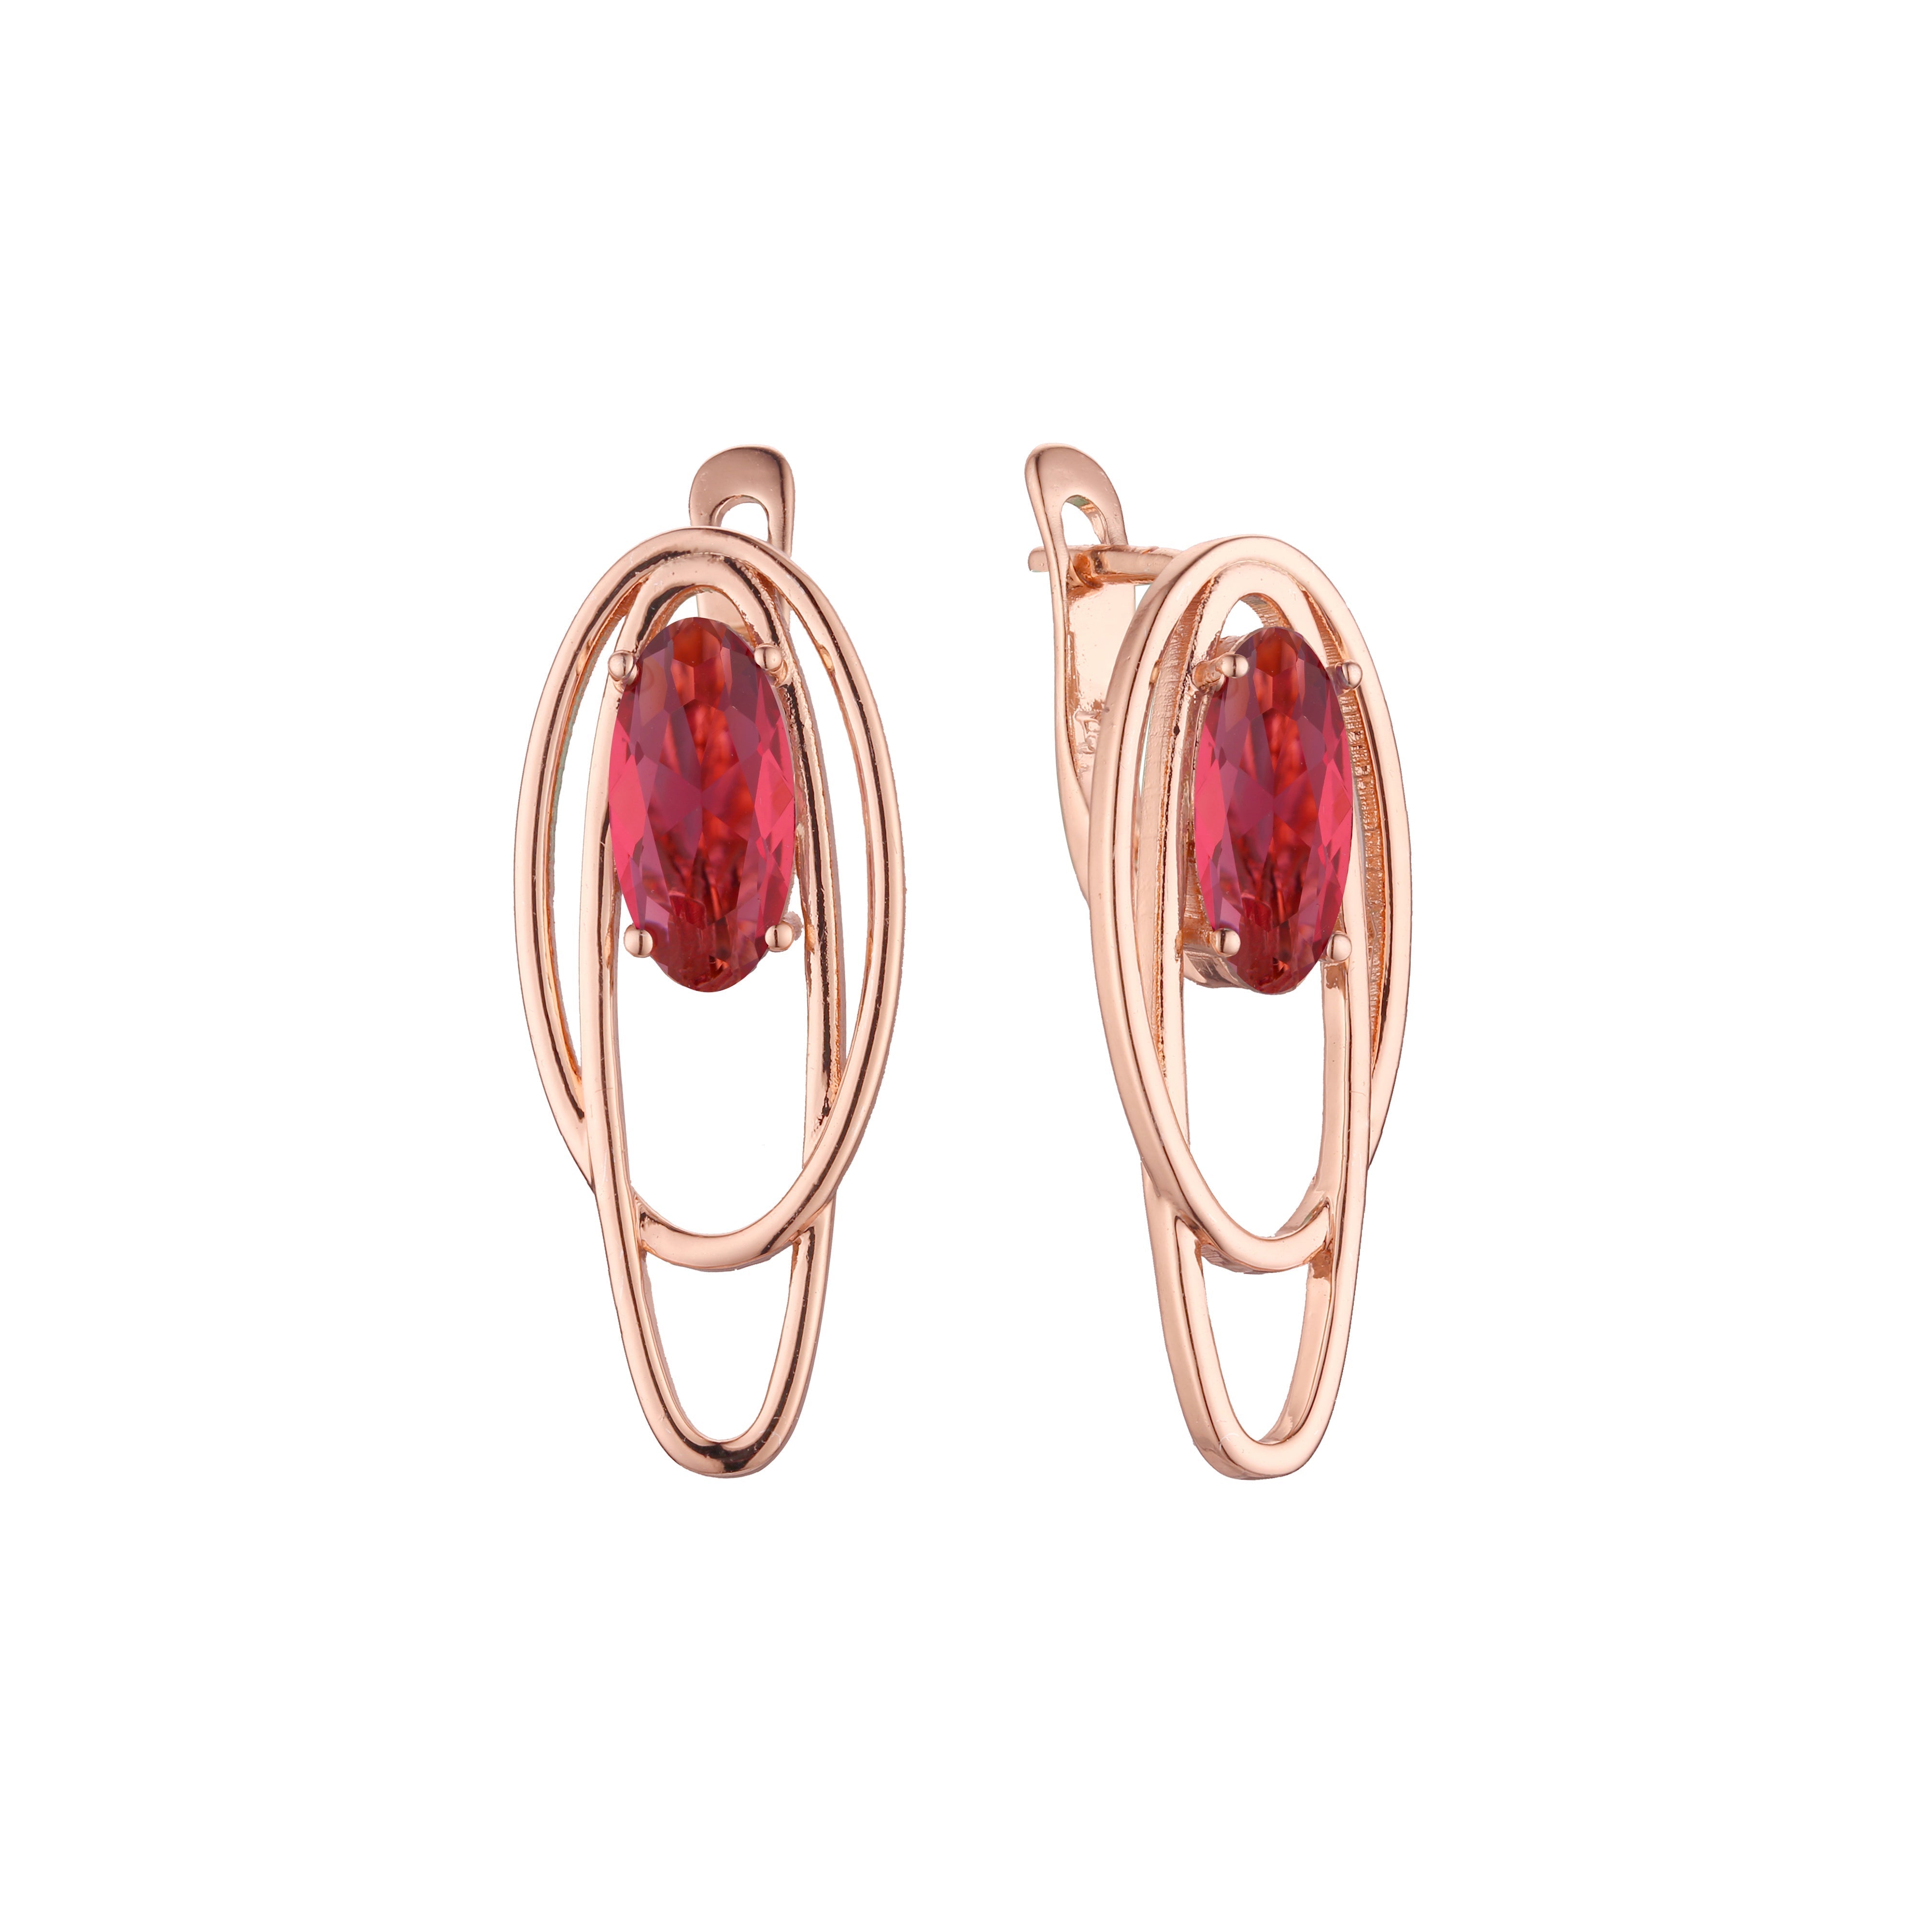 .Solitaire earrings in Rose Gold, two tone plating colors